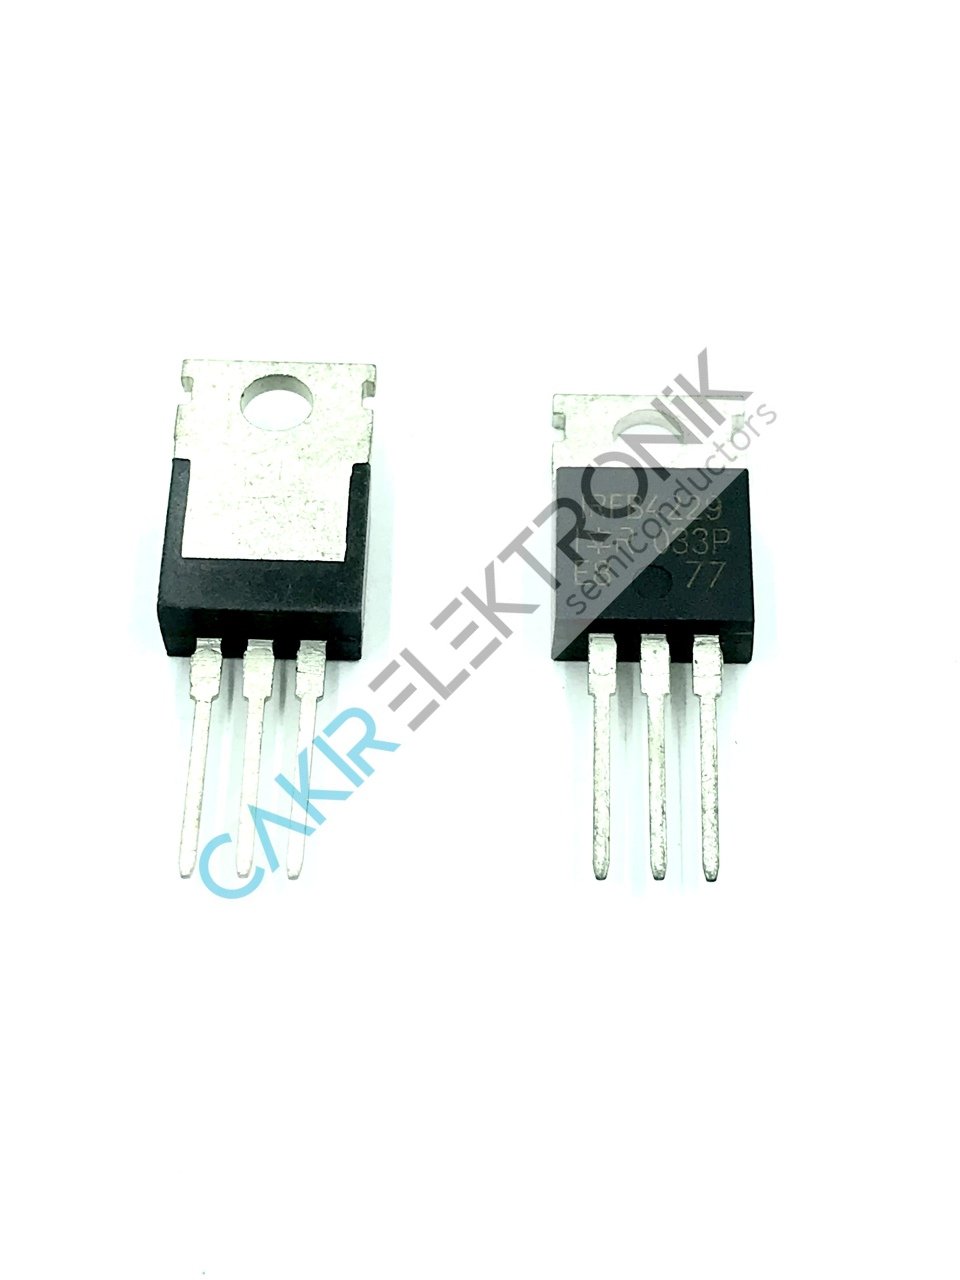 IRFB4229  250V. 46A. N KANAL MOSFET